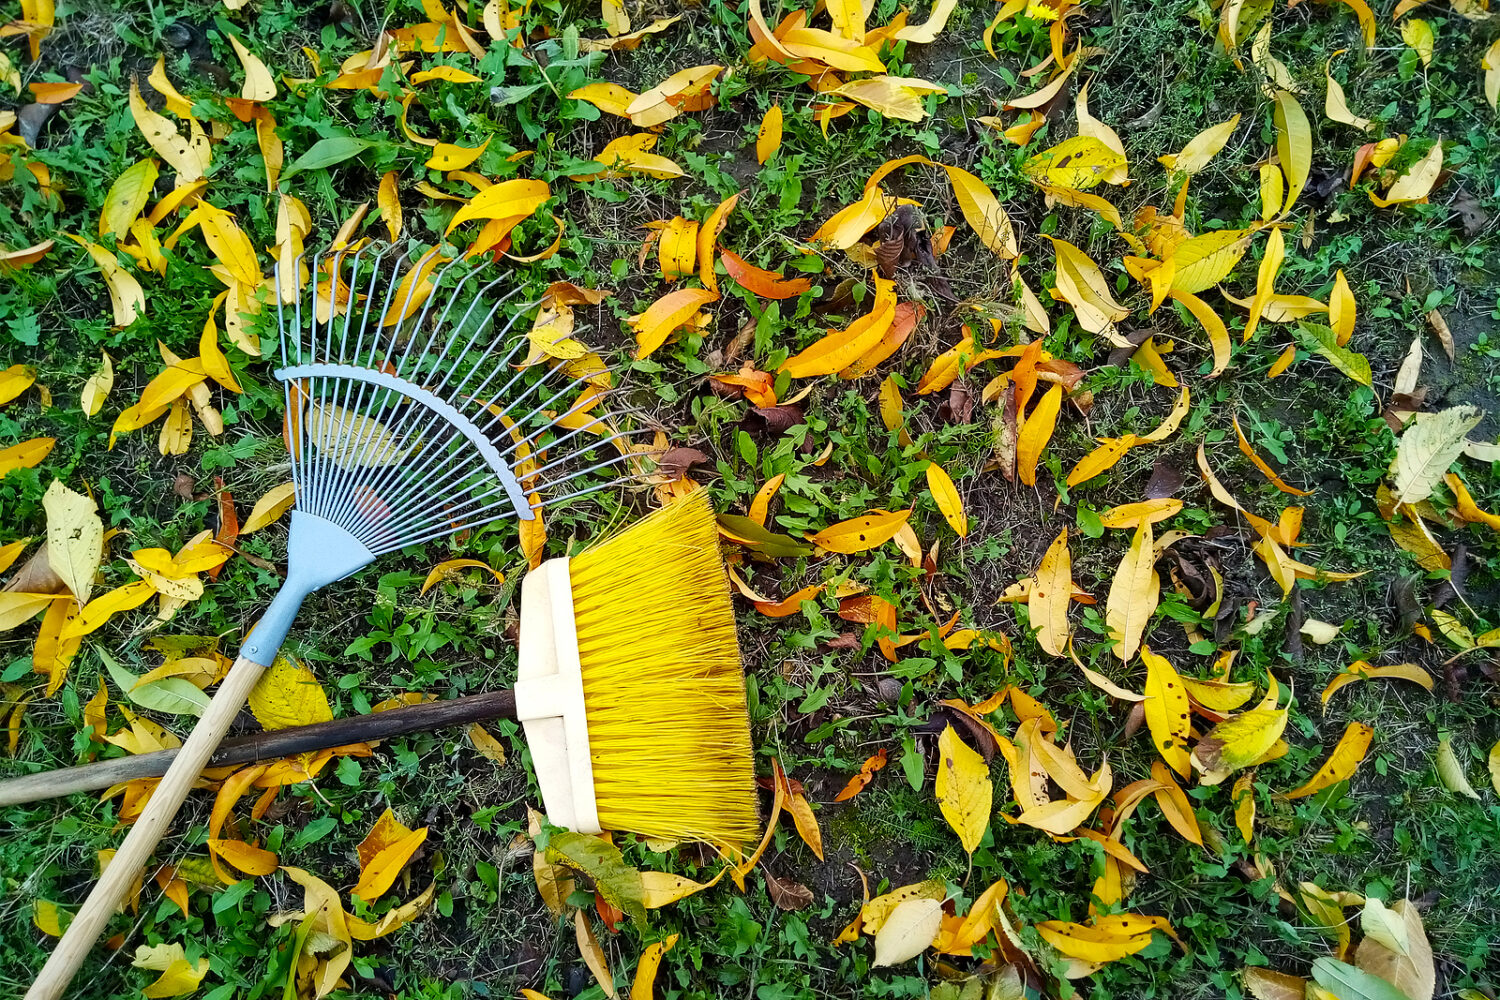 Rake And Broom Lying On The Yellow Fallen Leaves In The Fall.